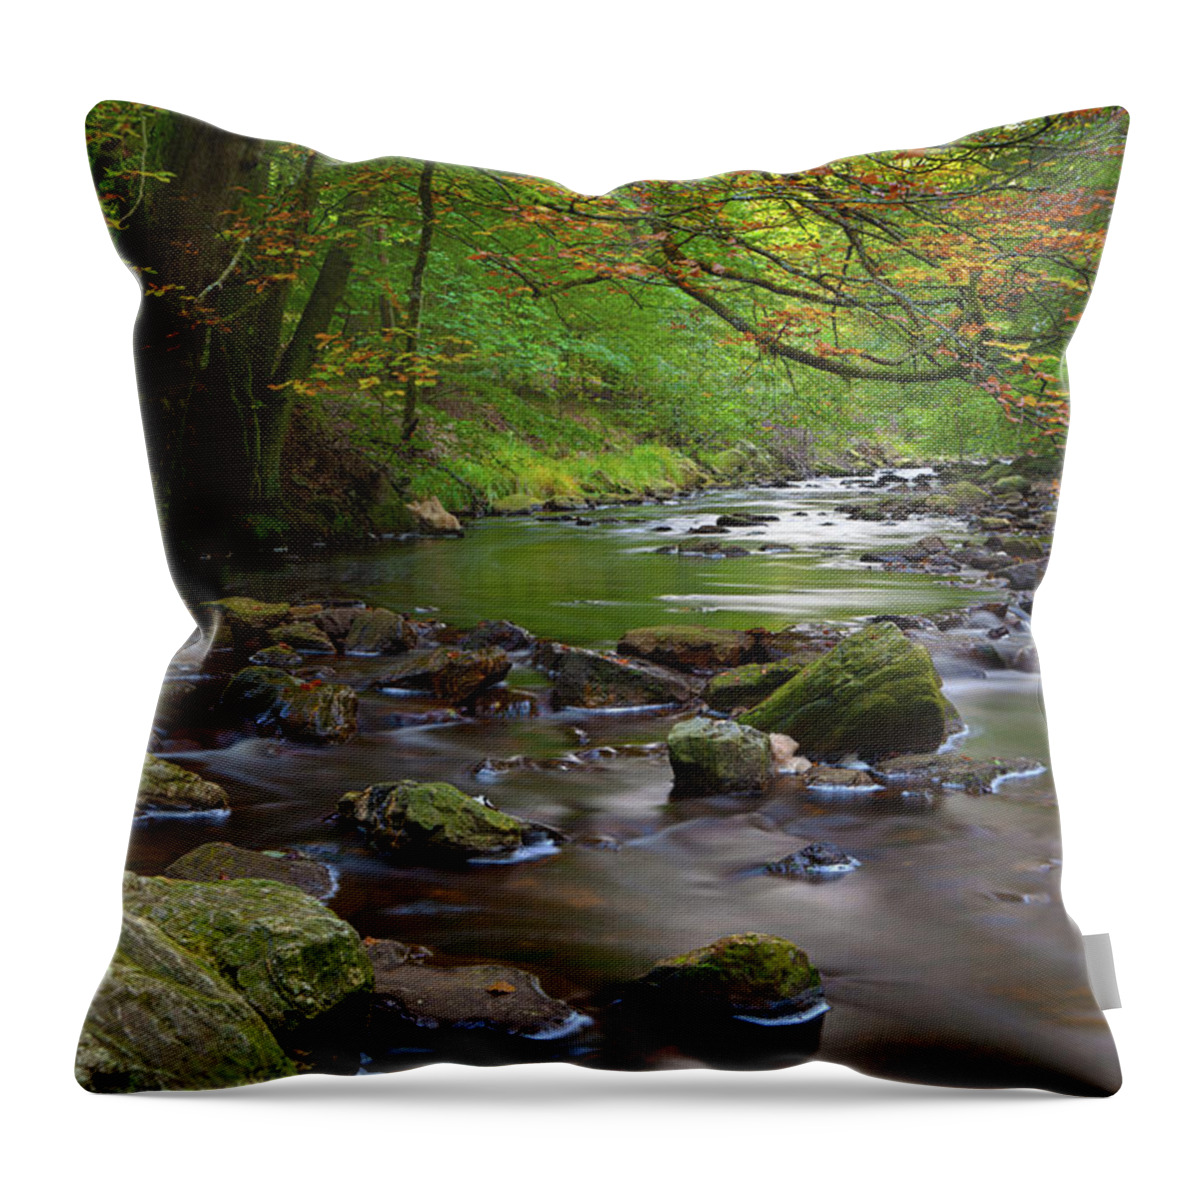 Scenics Throw Pillow featuring the photograph Autumn Stream Long Exposure by Michaelutech